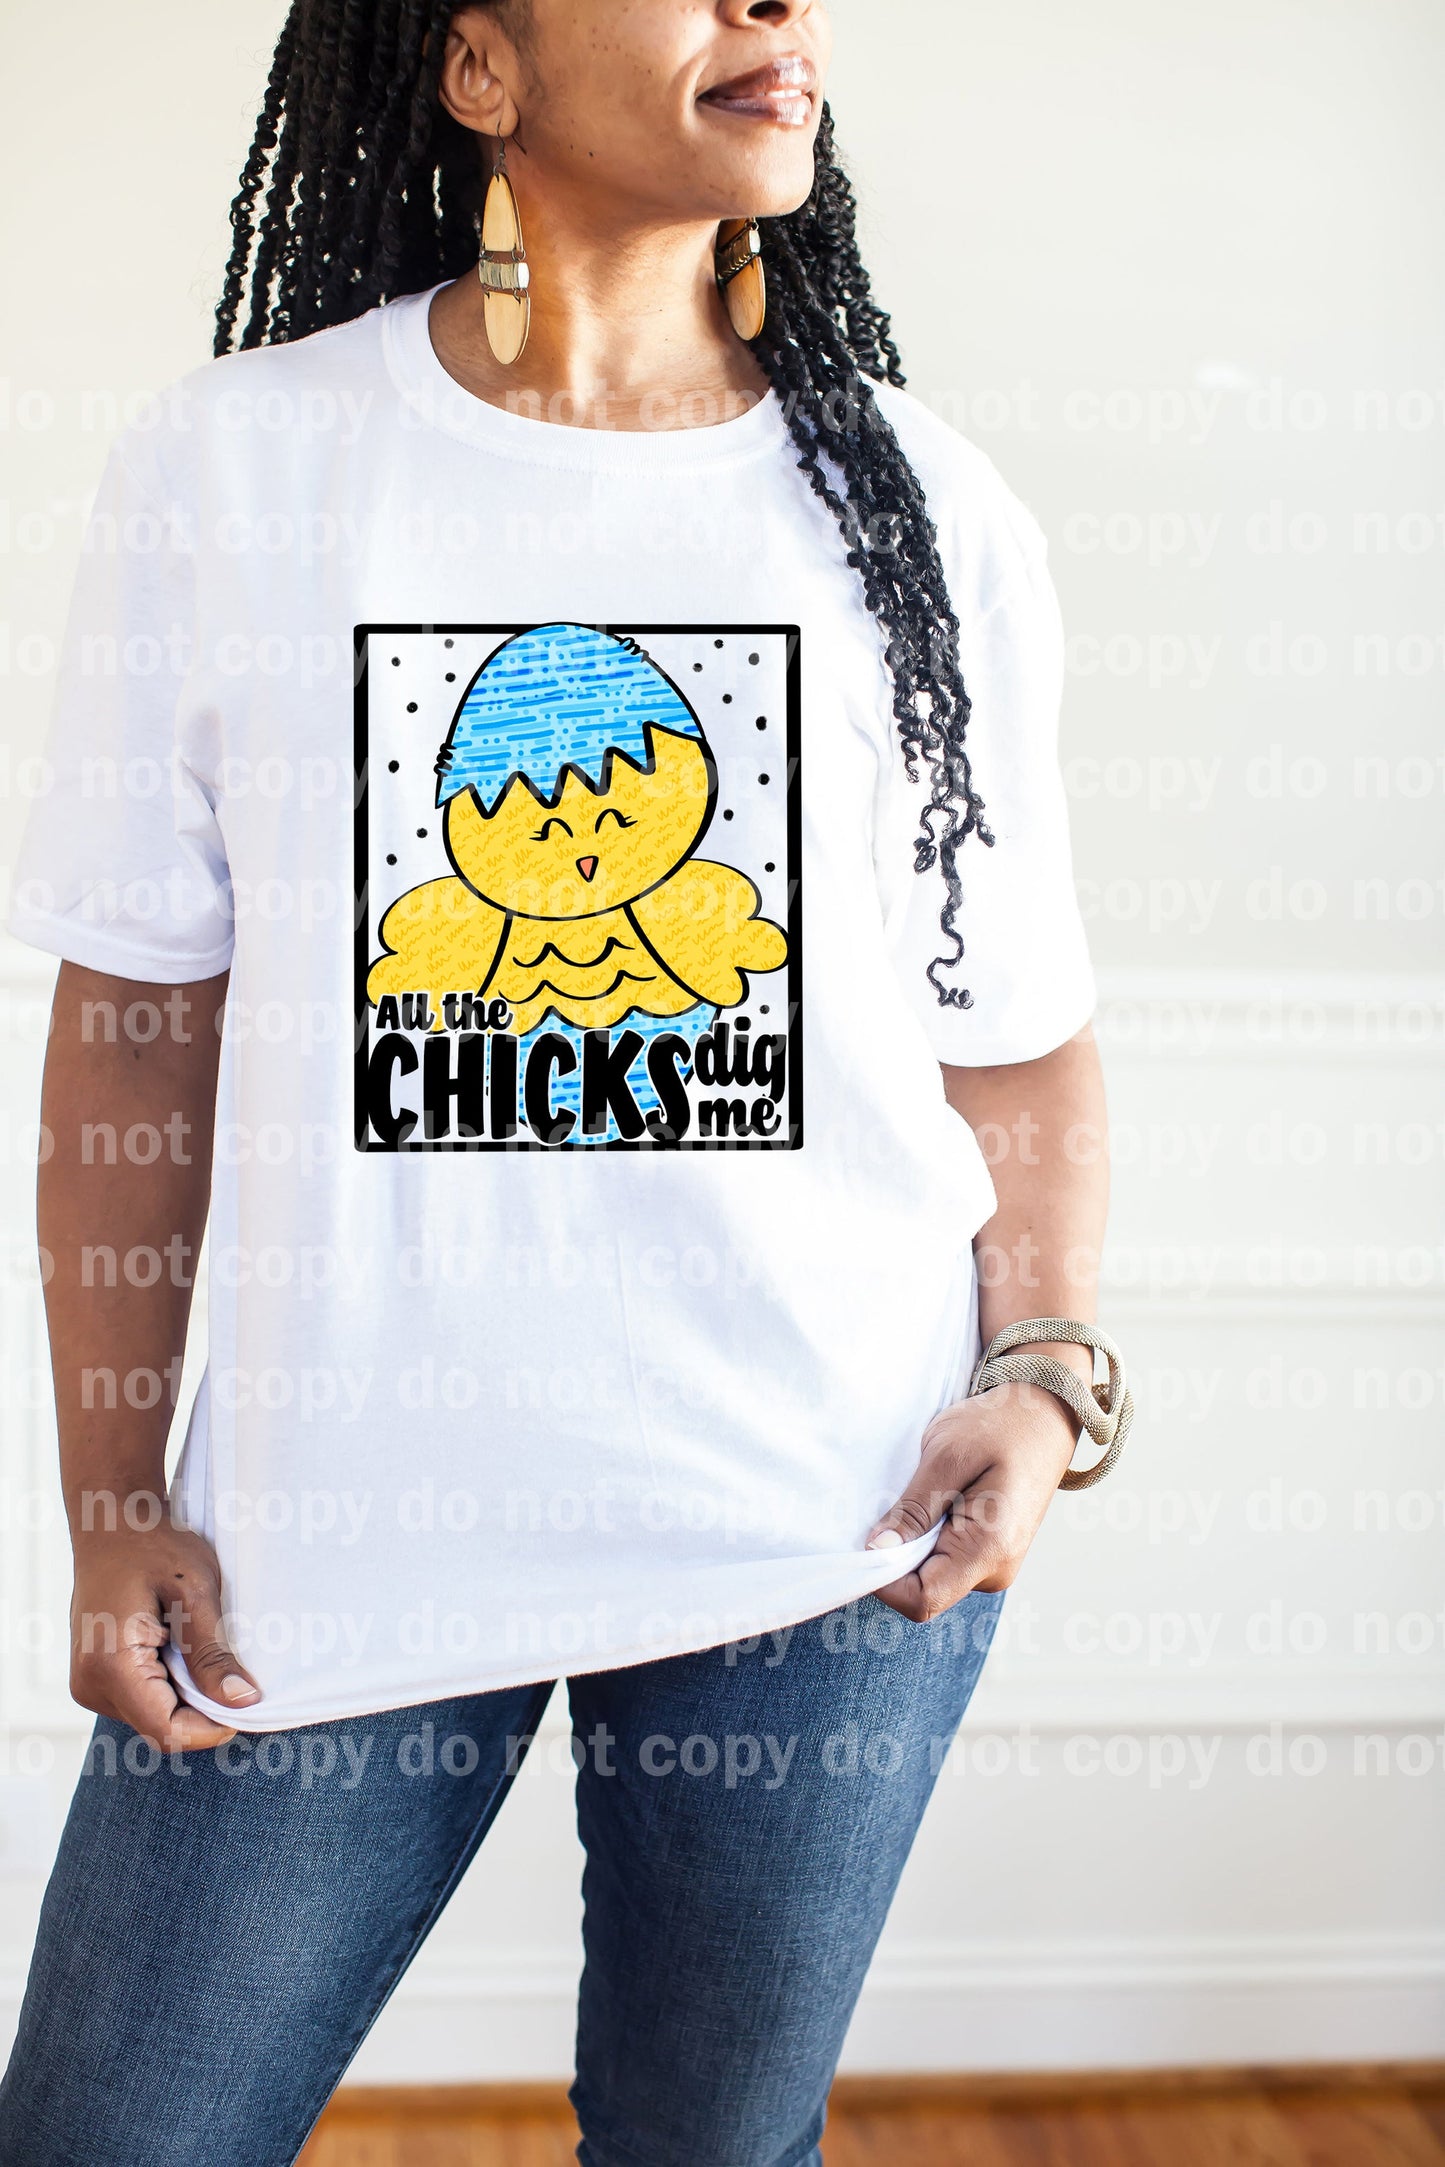 All The Chicks Dig Me Dream Print or Sublimation Print